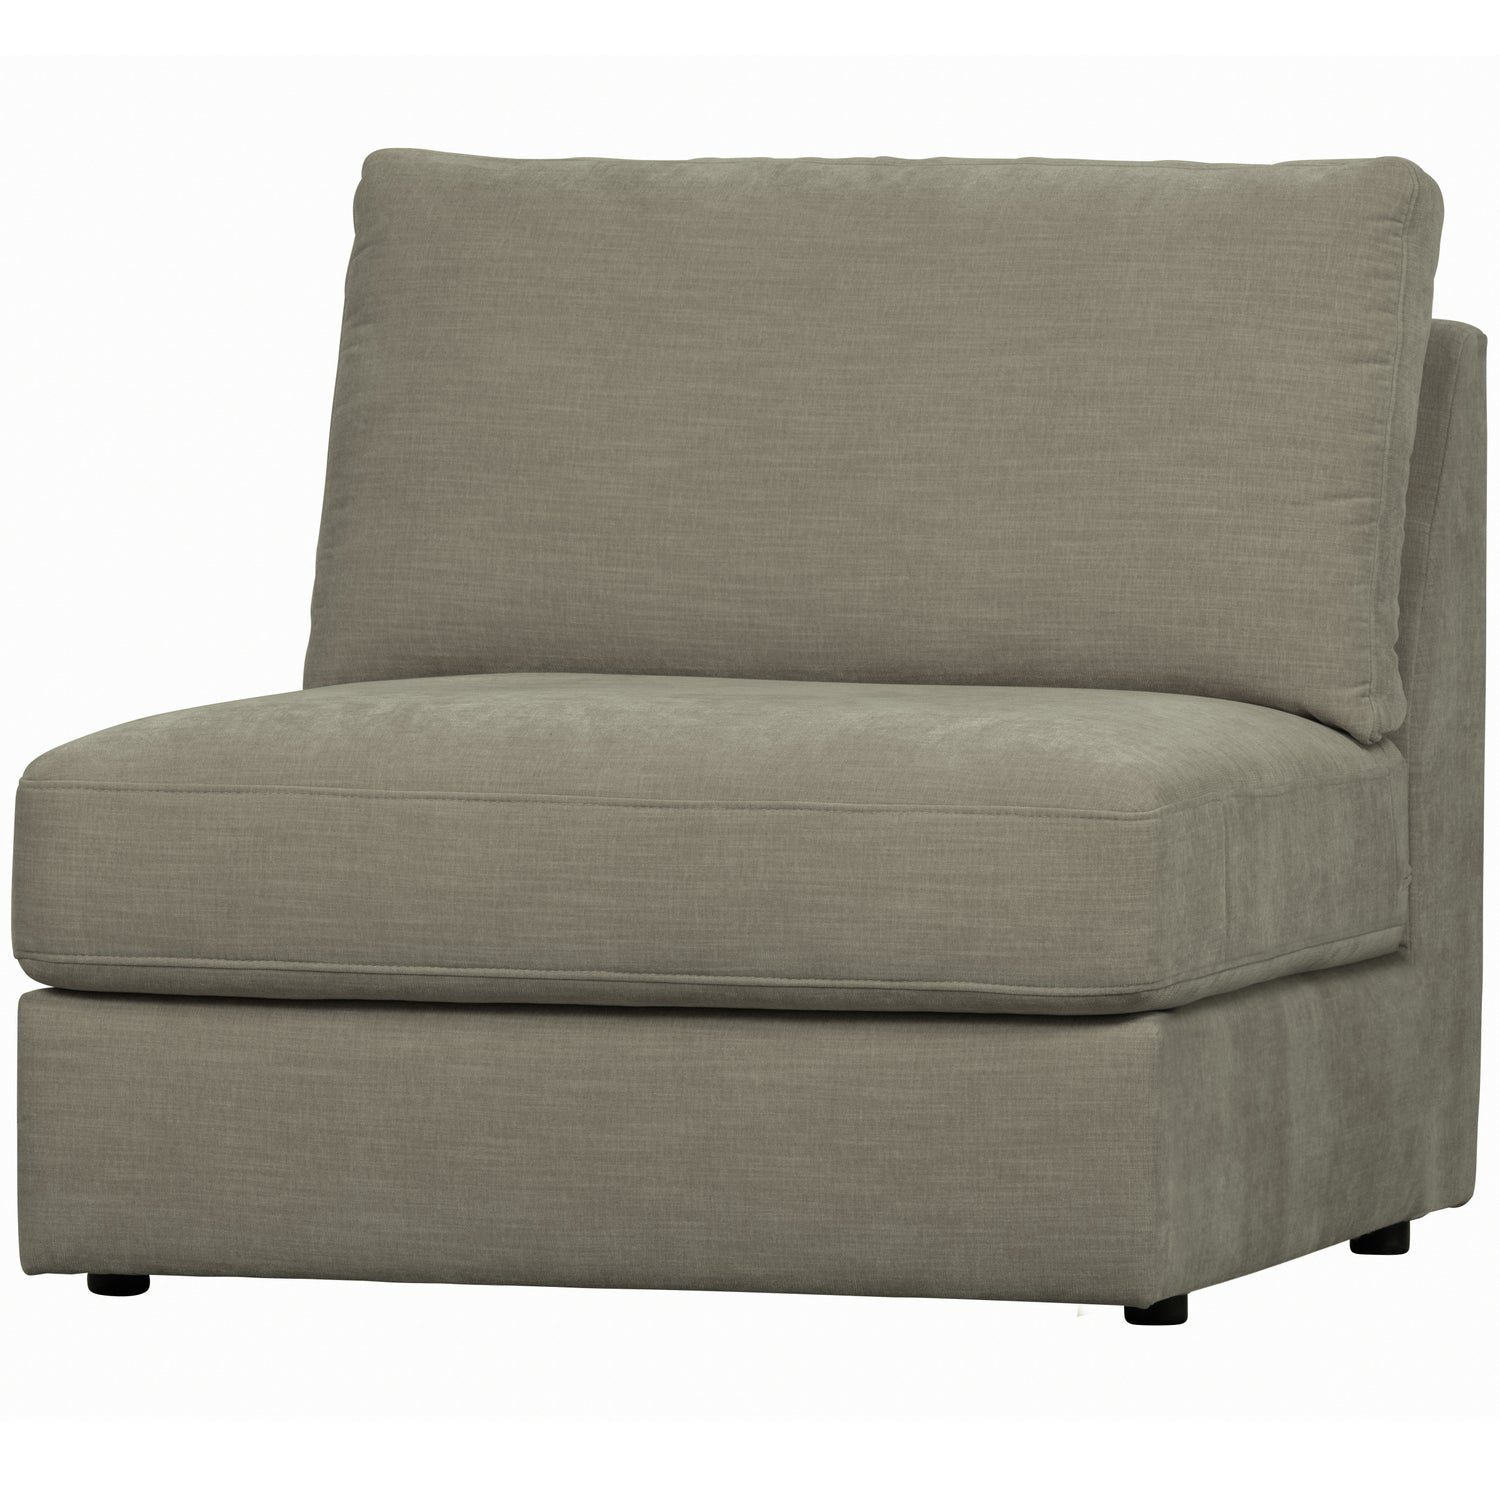 FAMILY 1-SEAT ELEMENT WITHOUT ARM WARM GREY